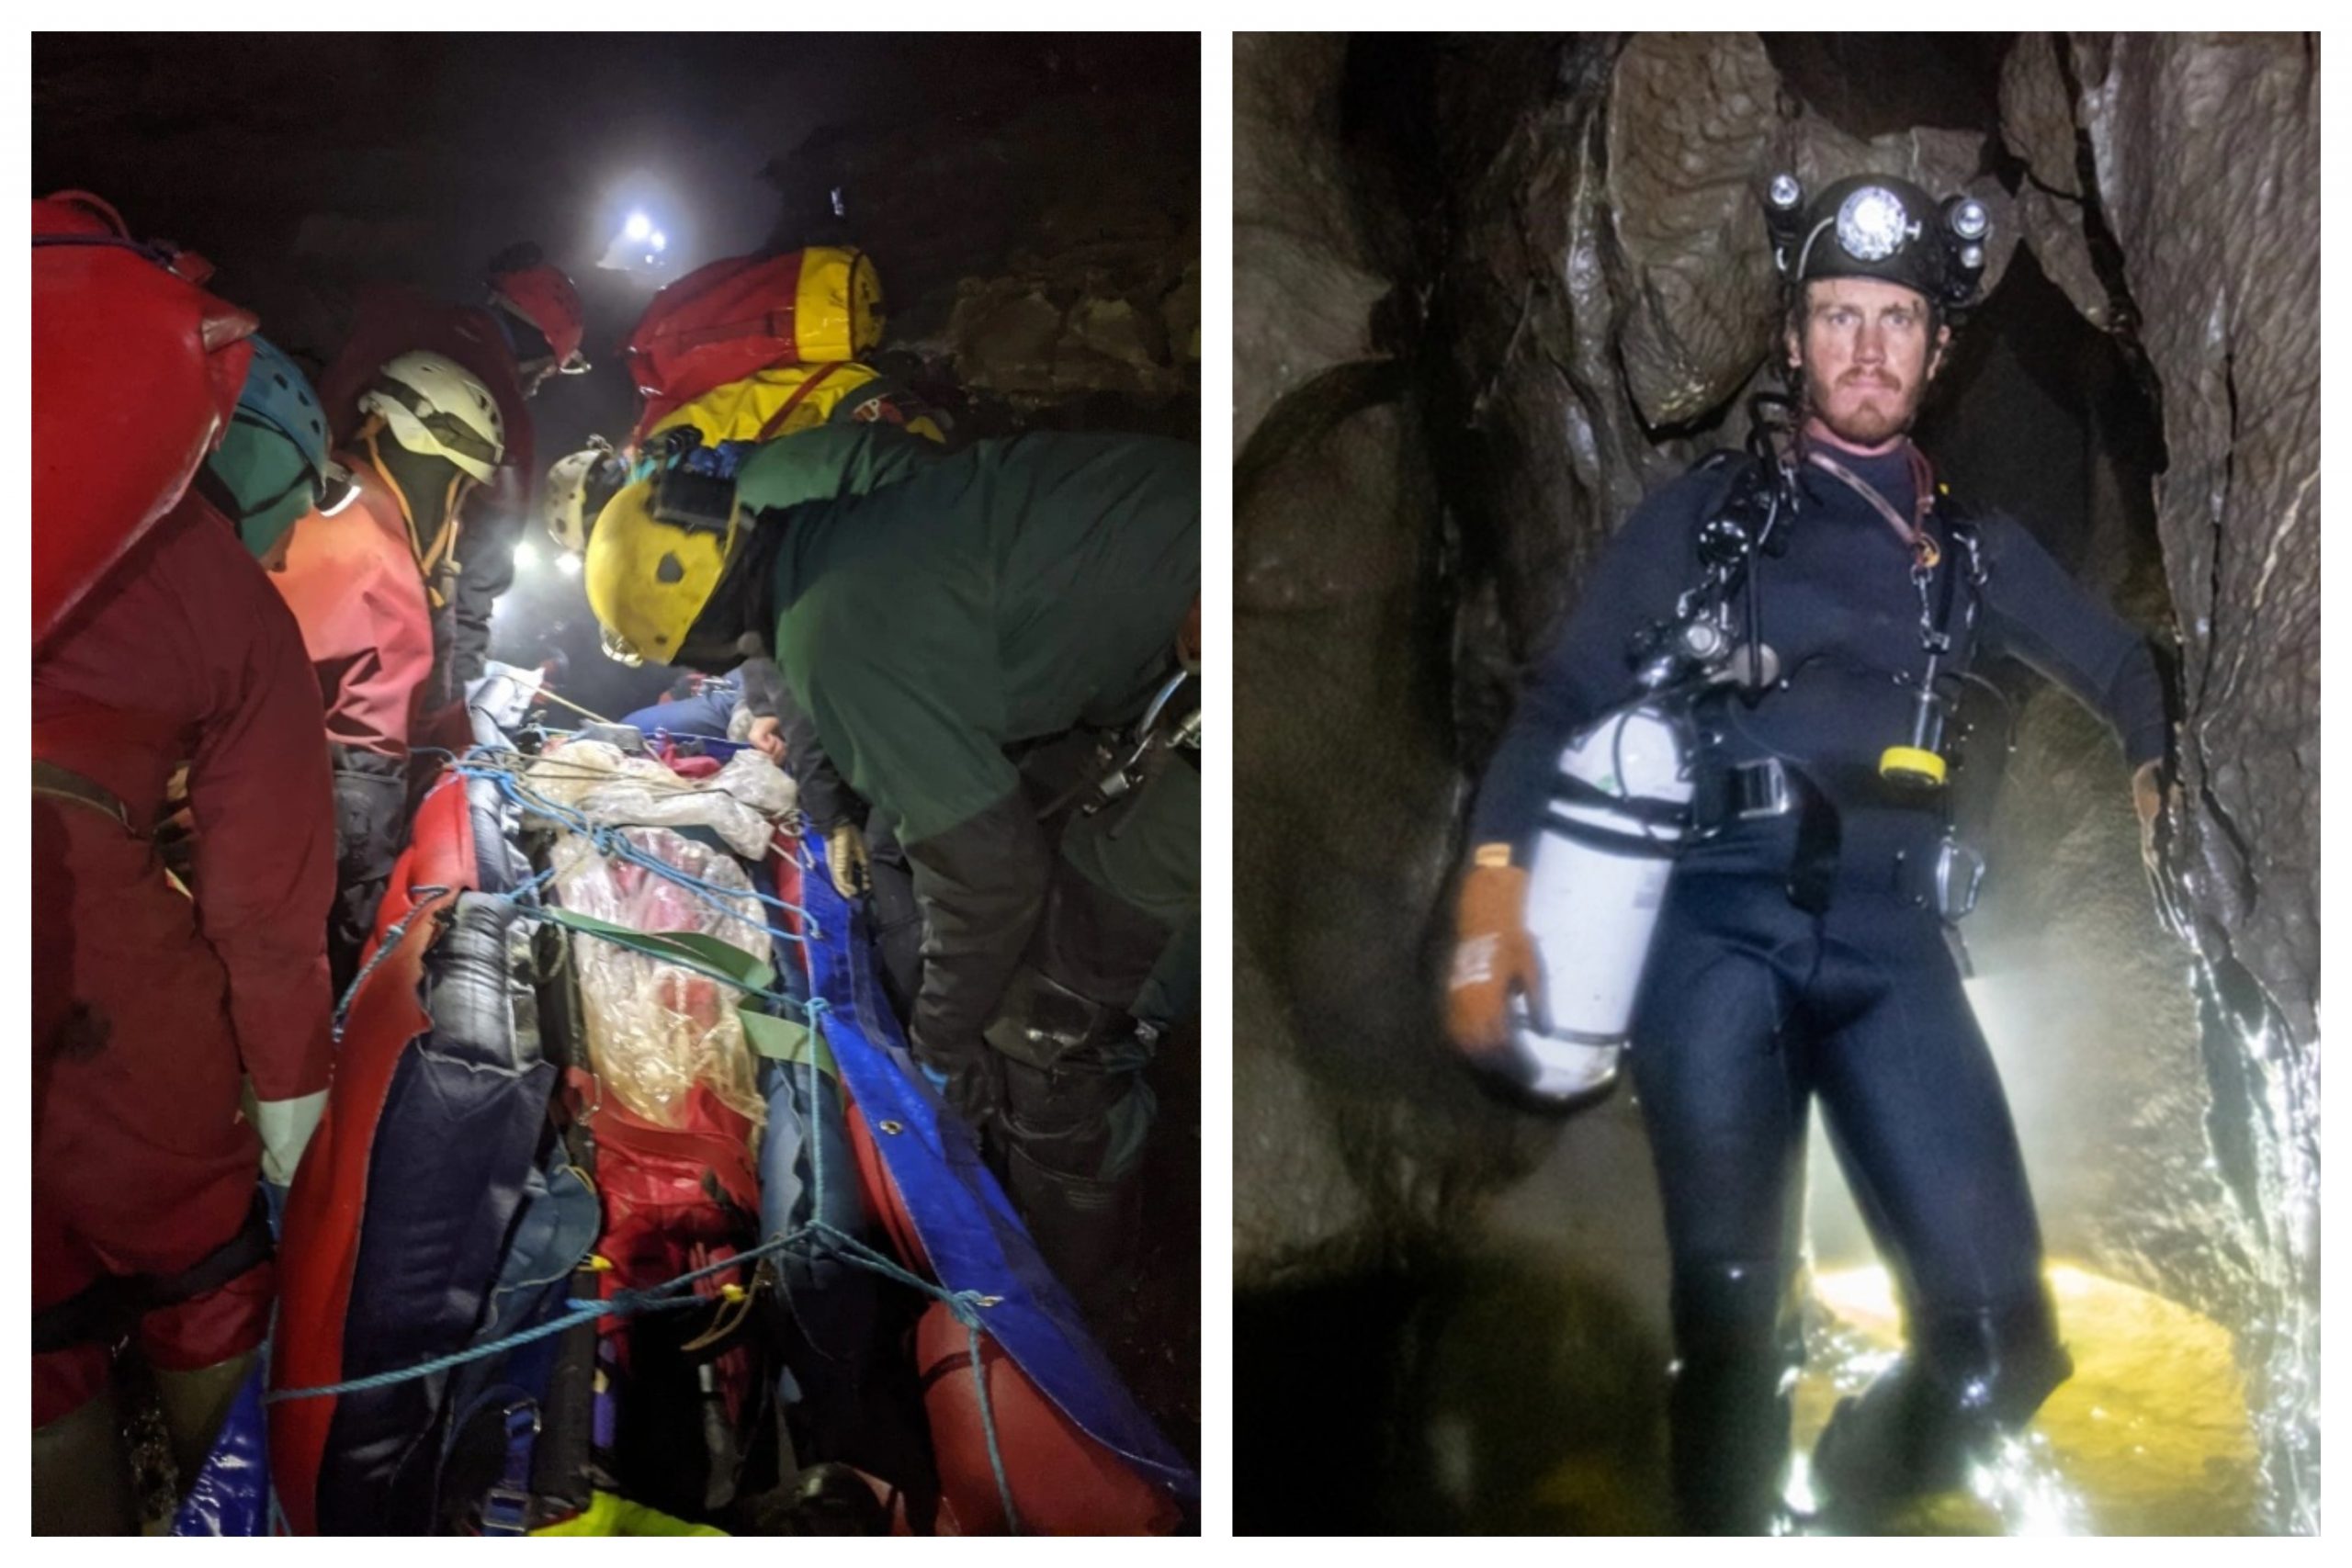 George Linnane (left) was rescued by volunteer cavers (right) in the longest cave recovery operation in Welsh history. Photo: South & Mid Wales Cave Rescue Team